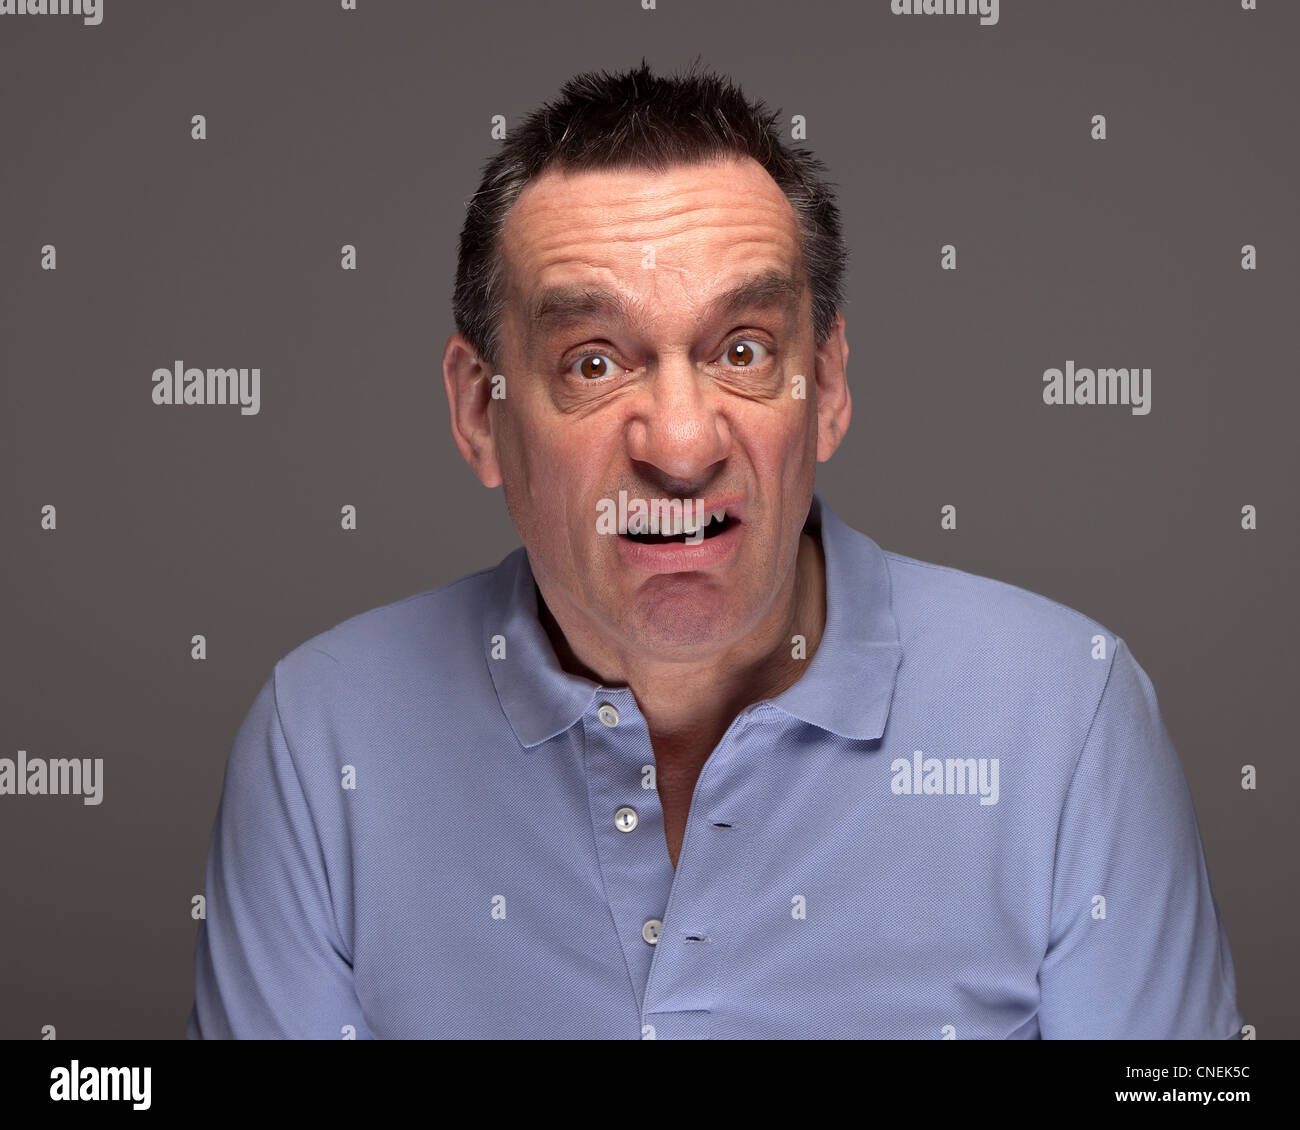 Middle Age Man Pulling Funny Grimace Face on Grey Background Stock Photo